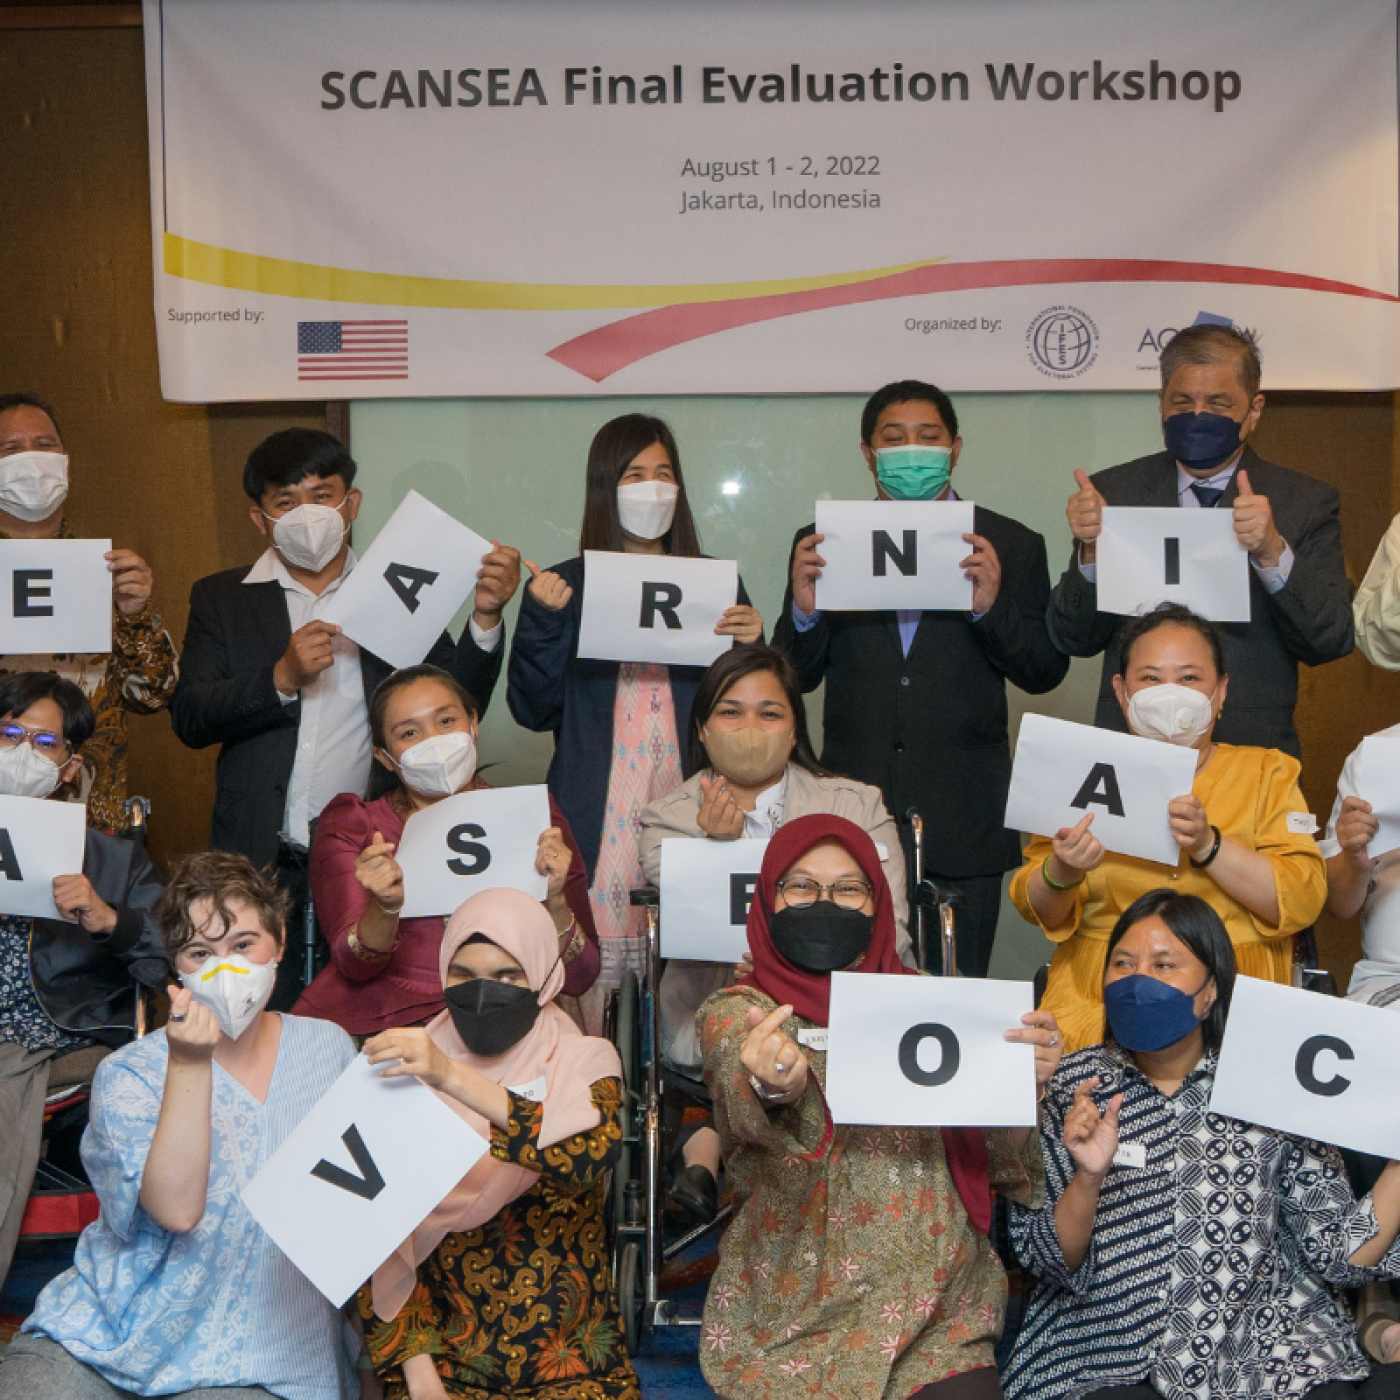 AGENDA Evaluation Event, participants hold letters in front of sign. 